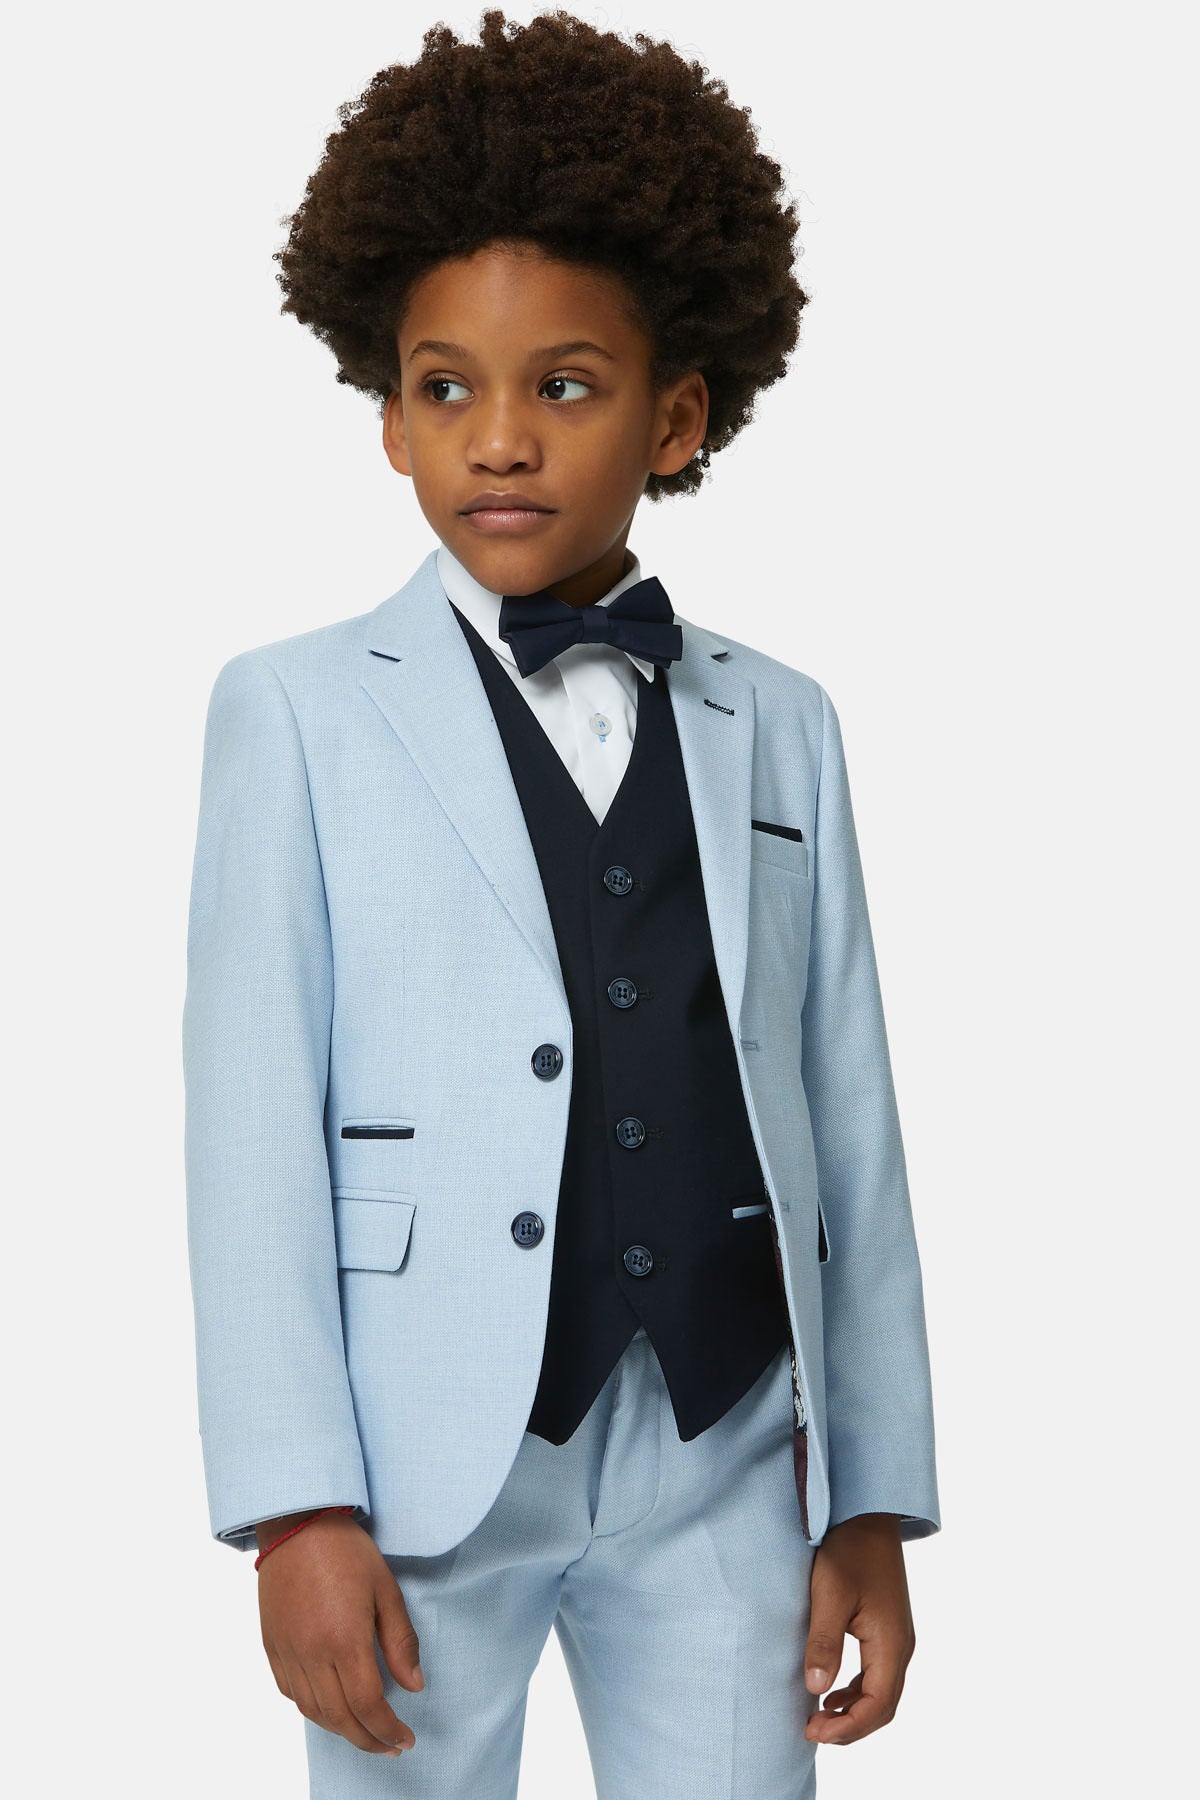 Boys Napoli Sky 3 Piece Suit-Close Up of Front View